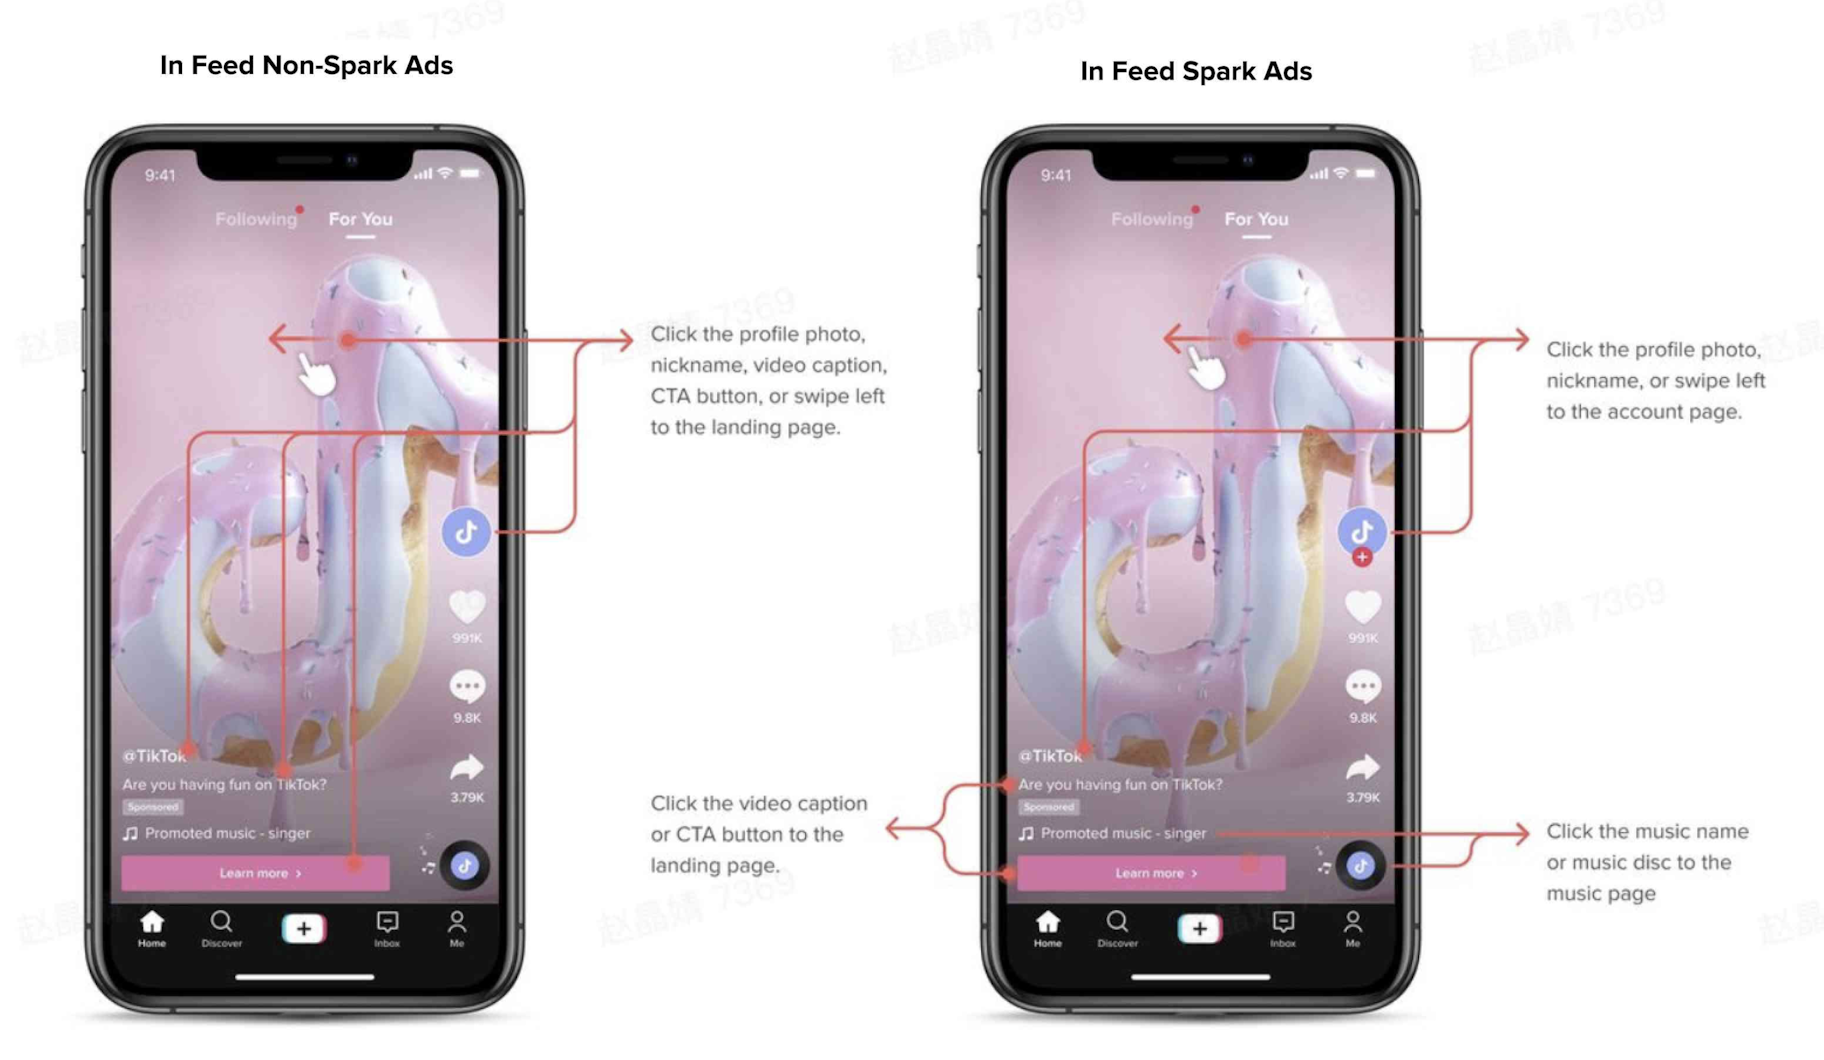 what are tiktok ads and spark ads